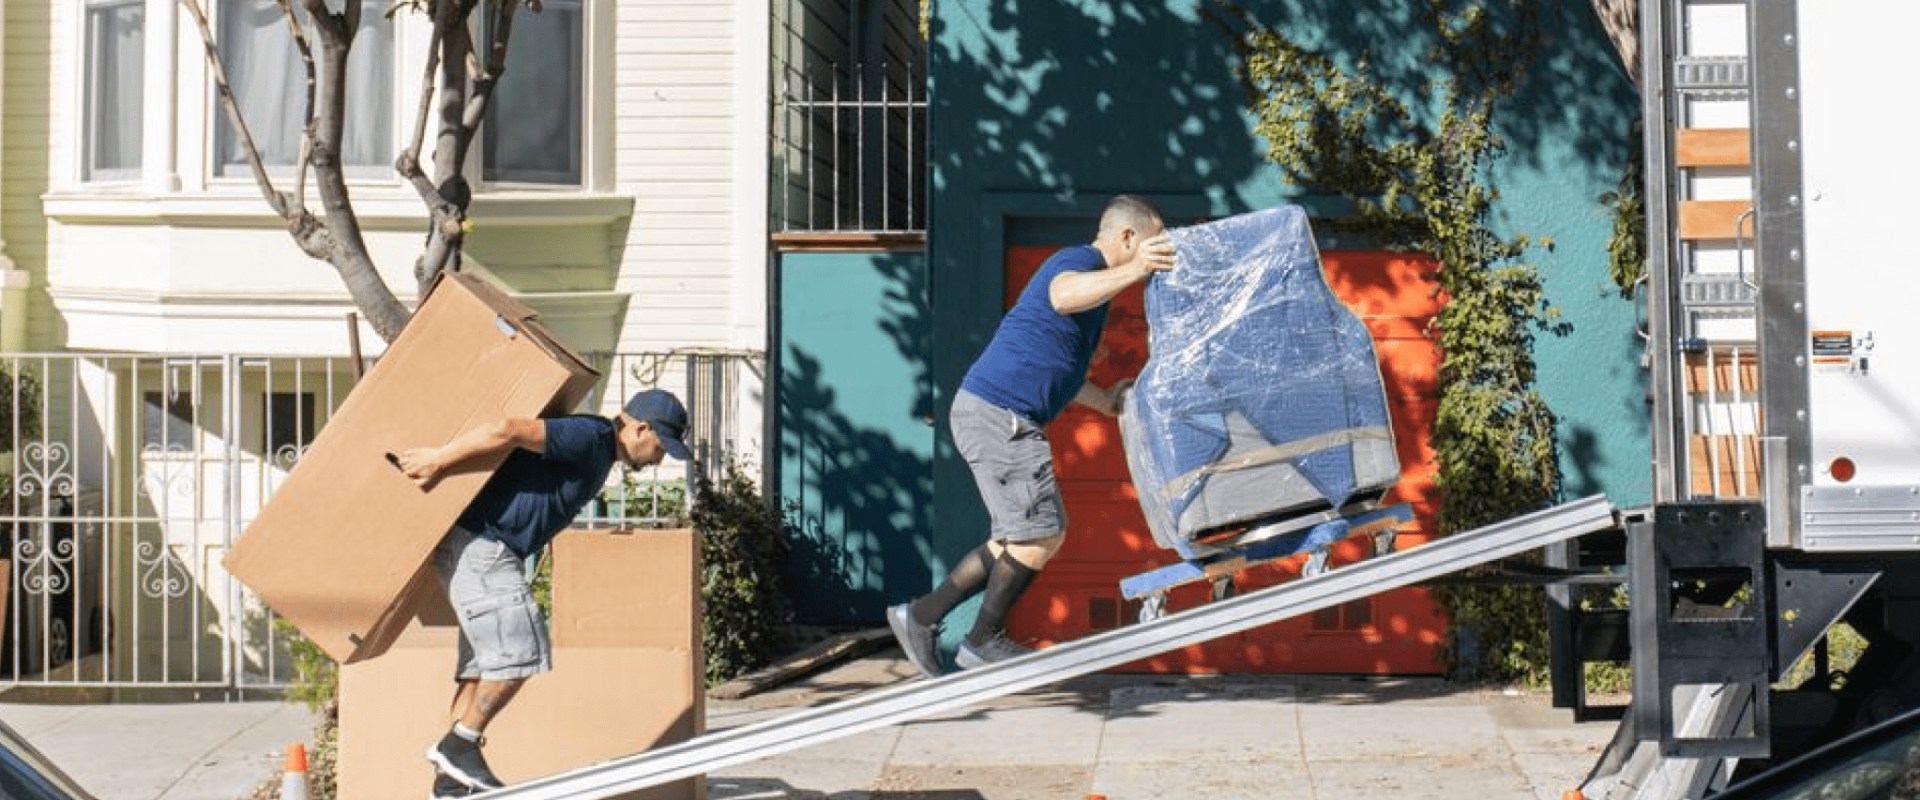 How much are movers per hour nyc?